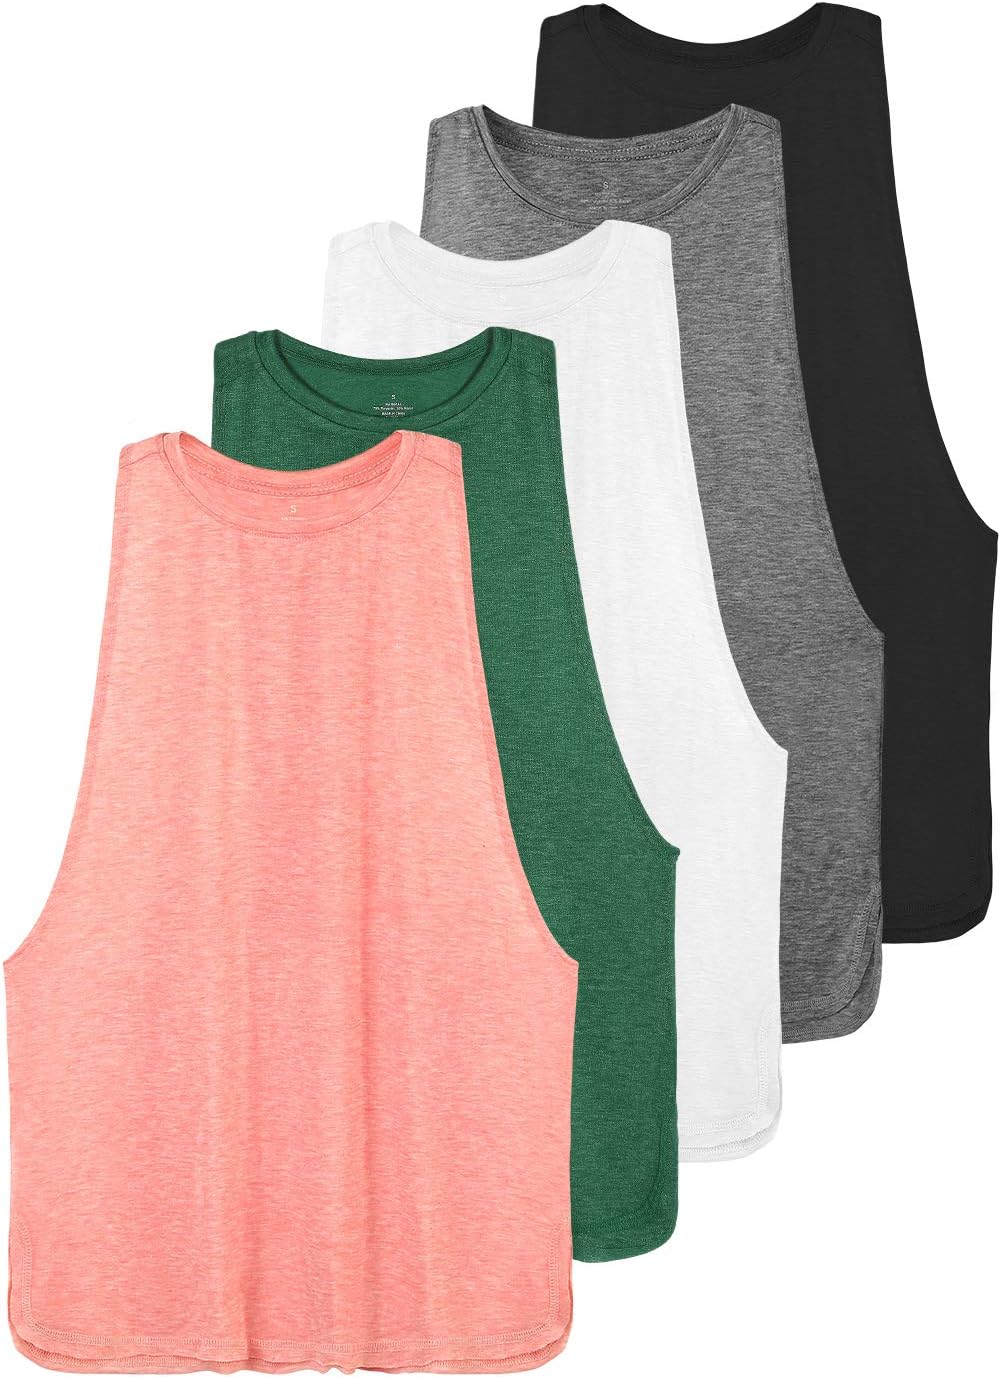 Ullnoy Workout Tank Tops Review